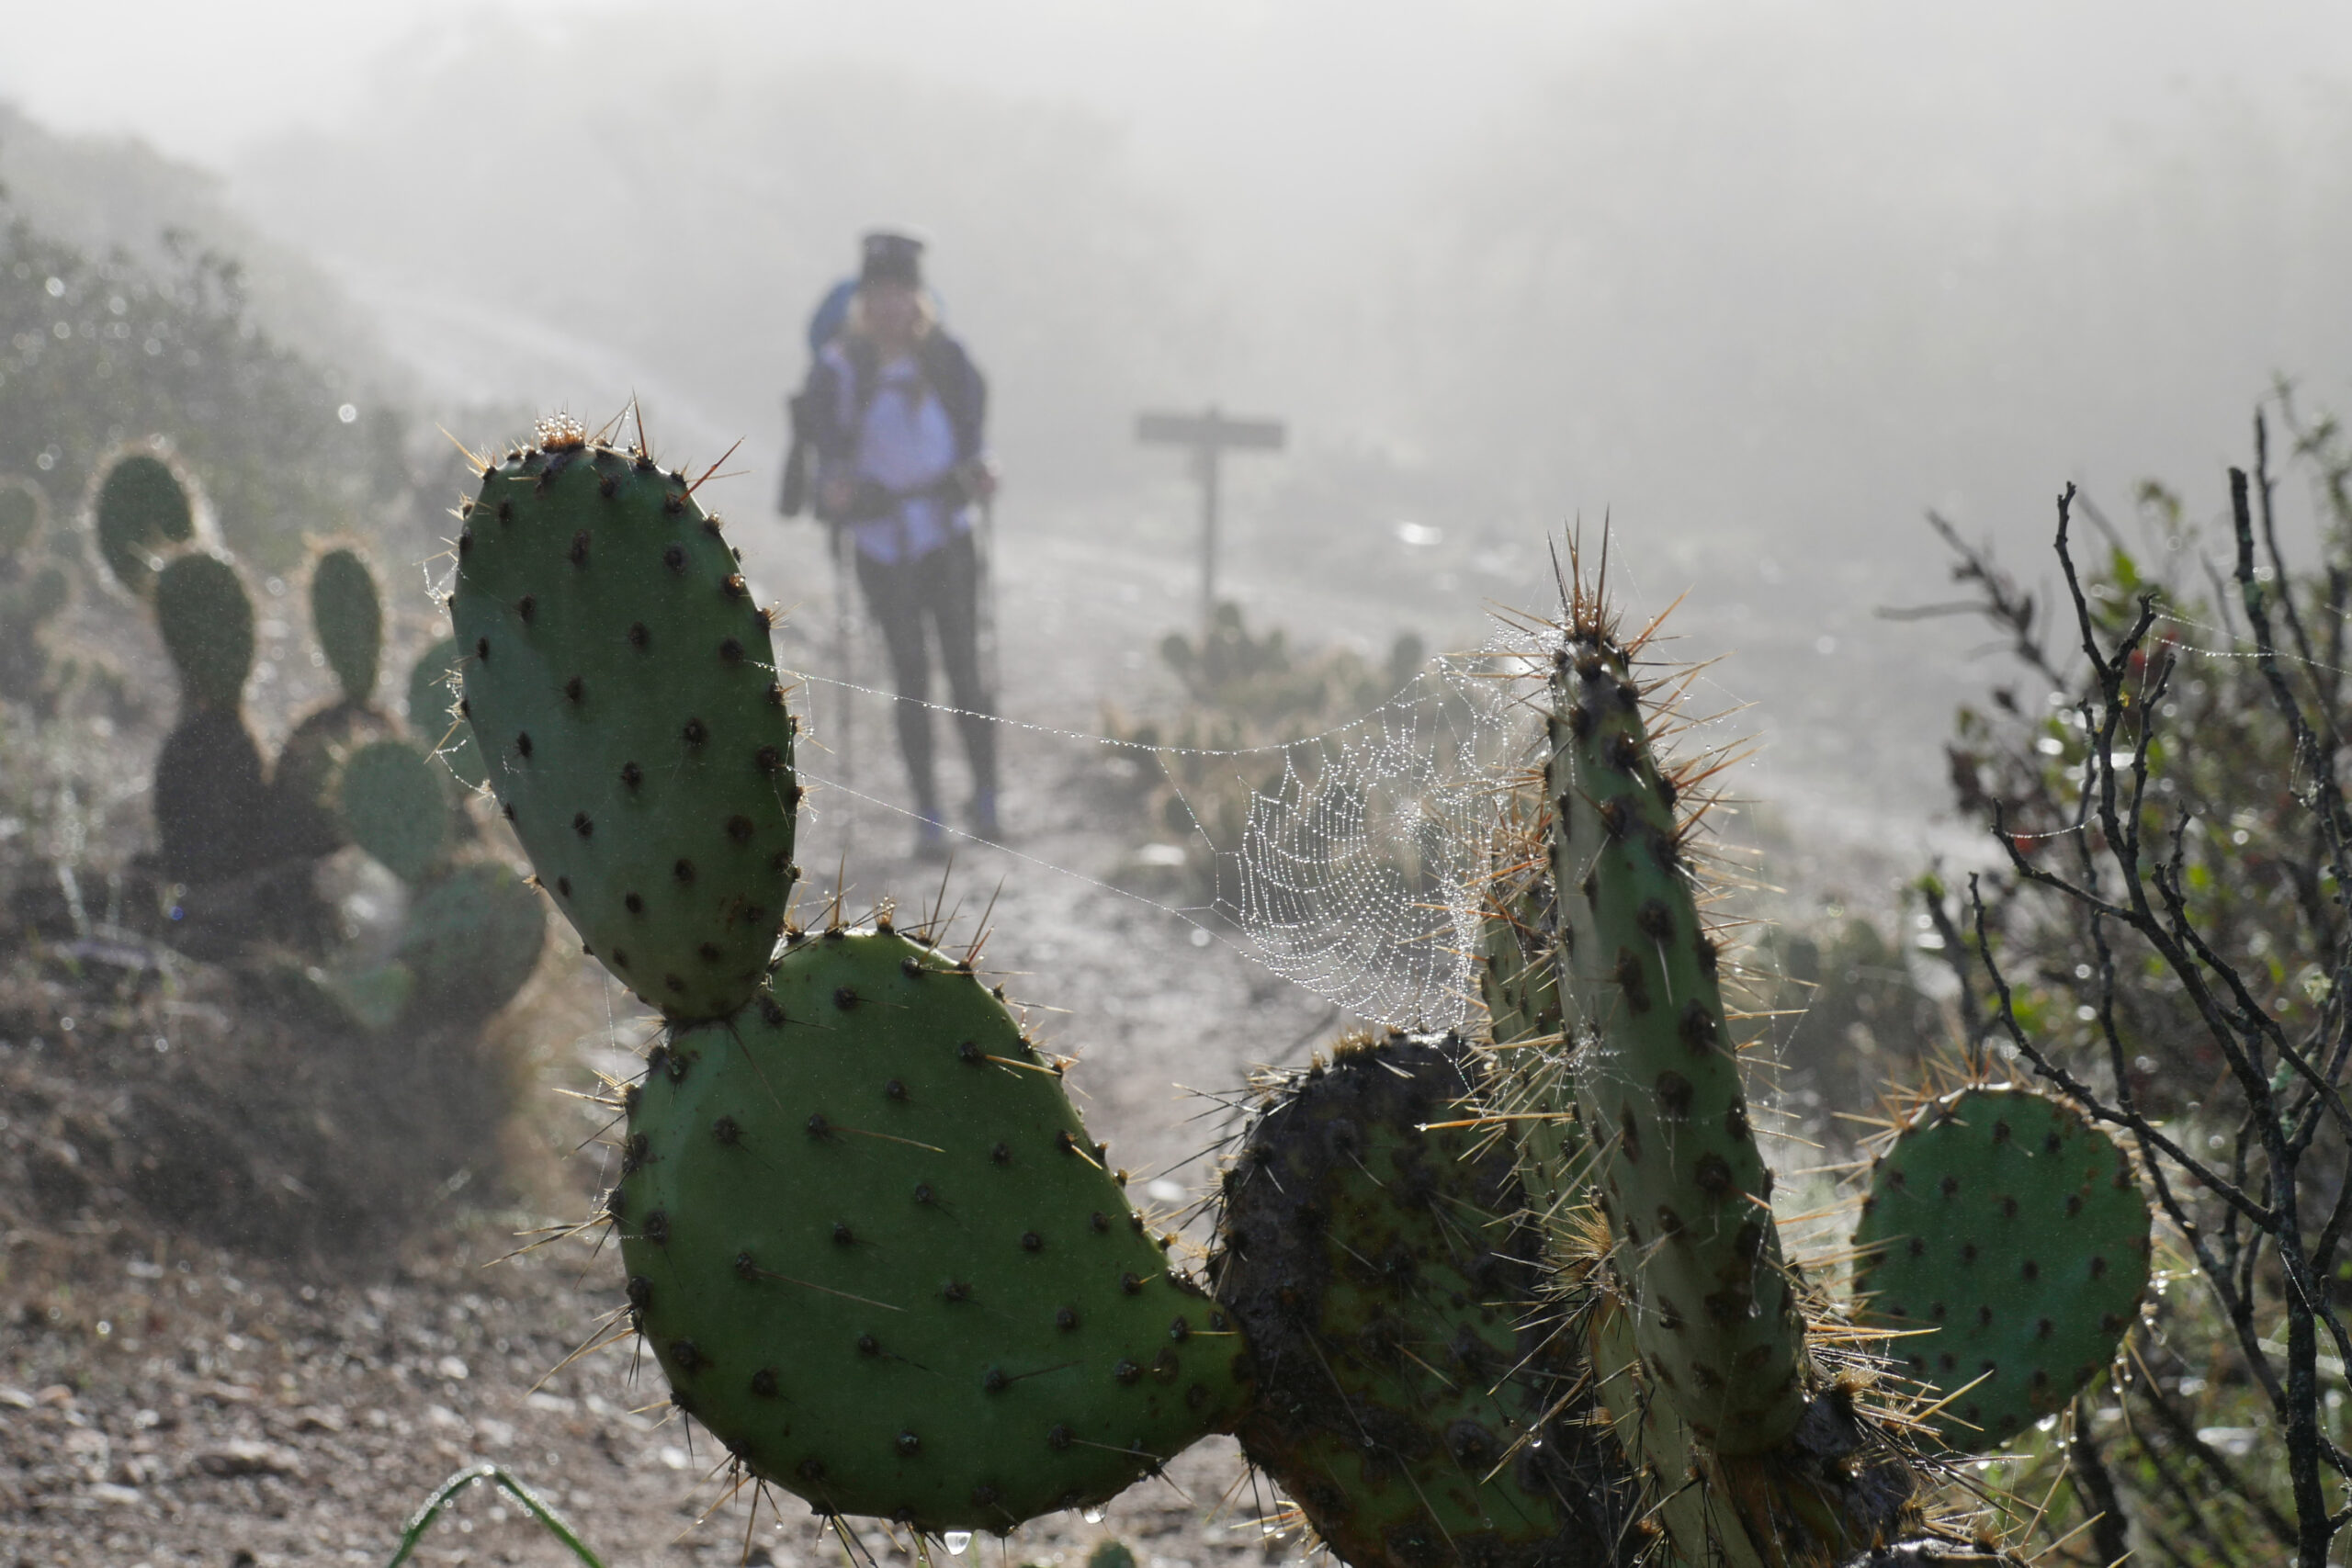 A spider web sits on a prickly pear in front of a hiker on the Trans-Catalina Trail.